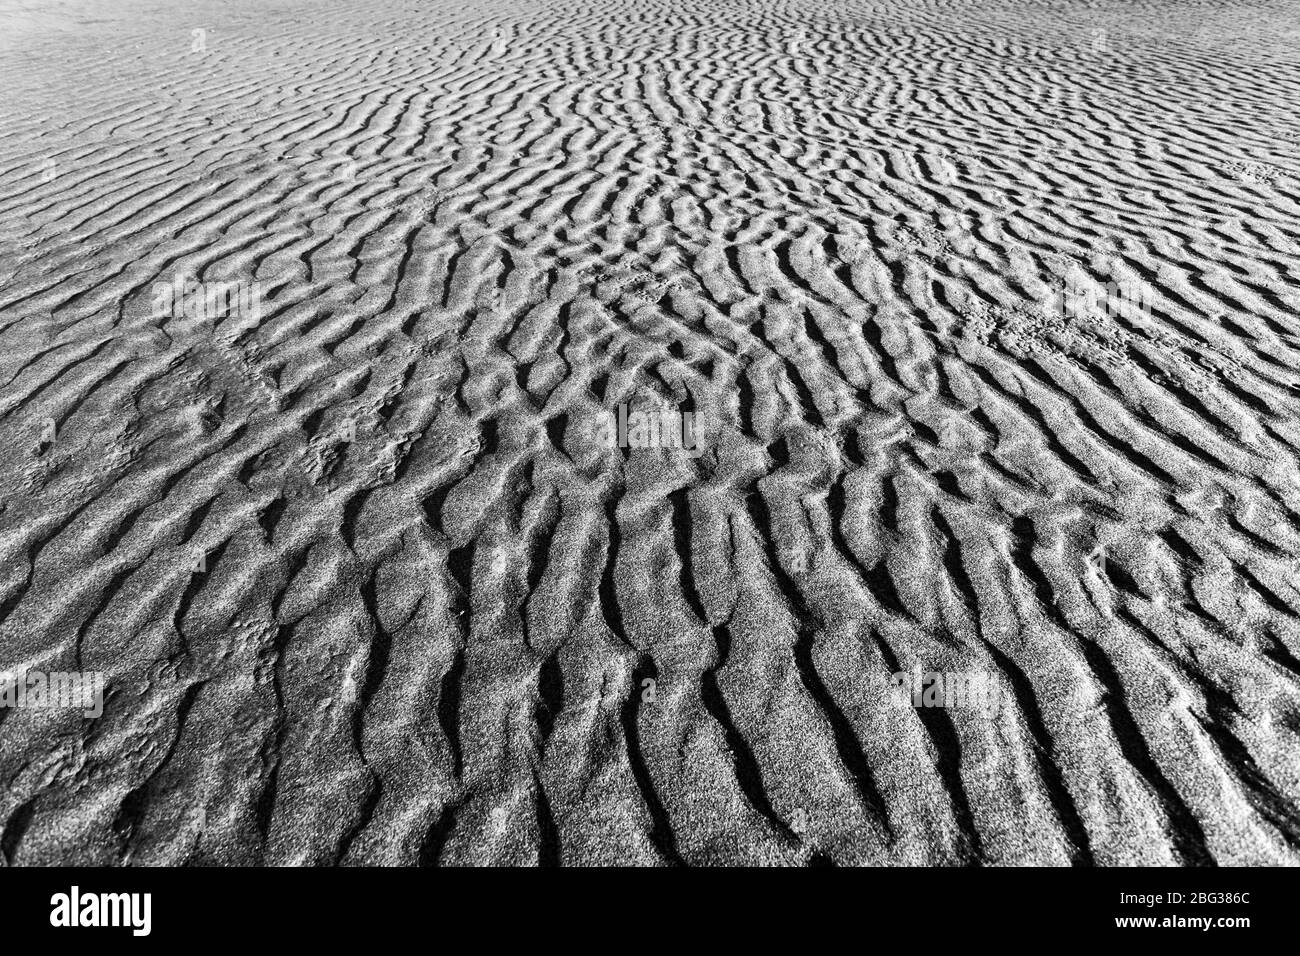 The natural movement of waves and wind formed patterns in the flat beach sand on the Washington State coast. Stock Photo